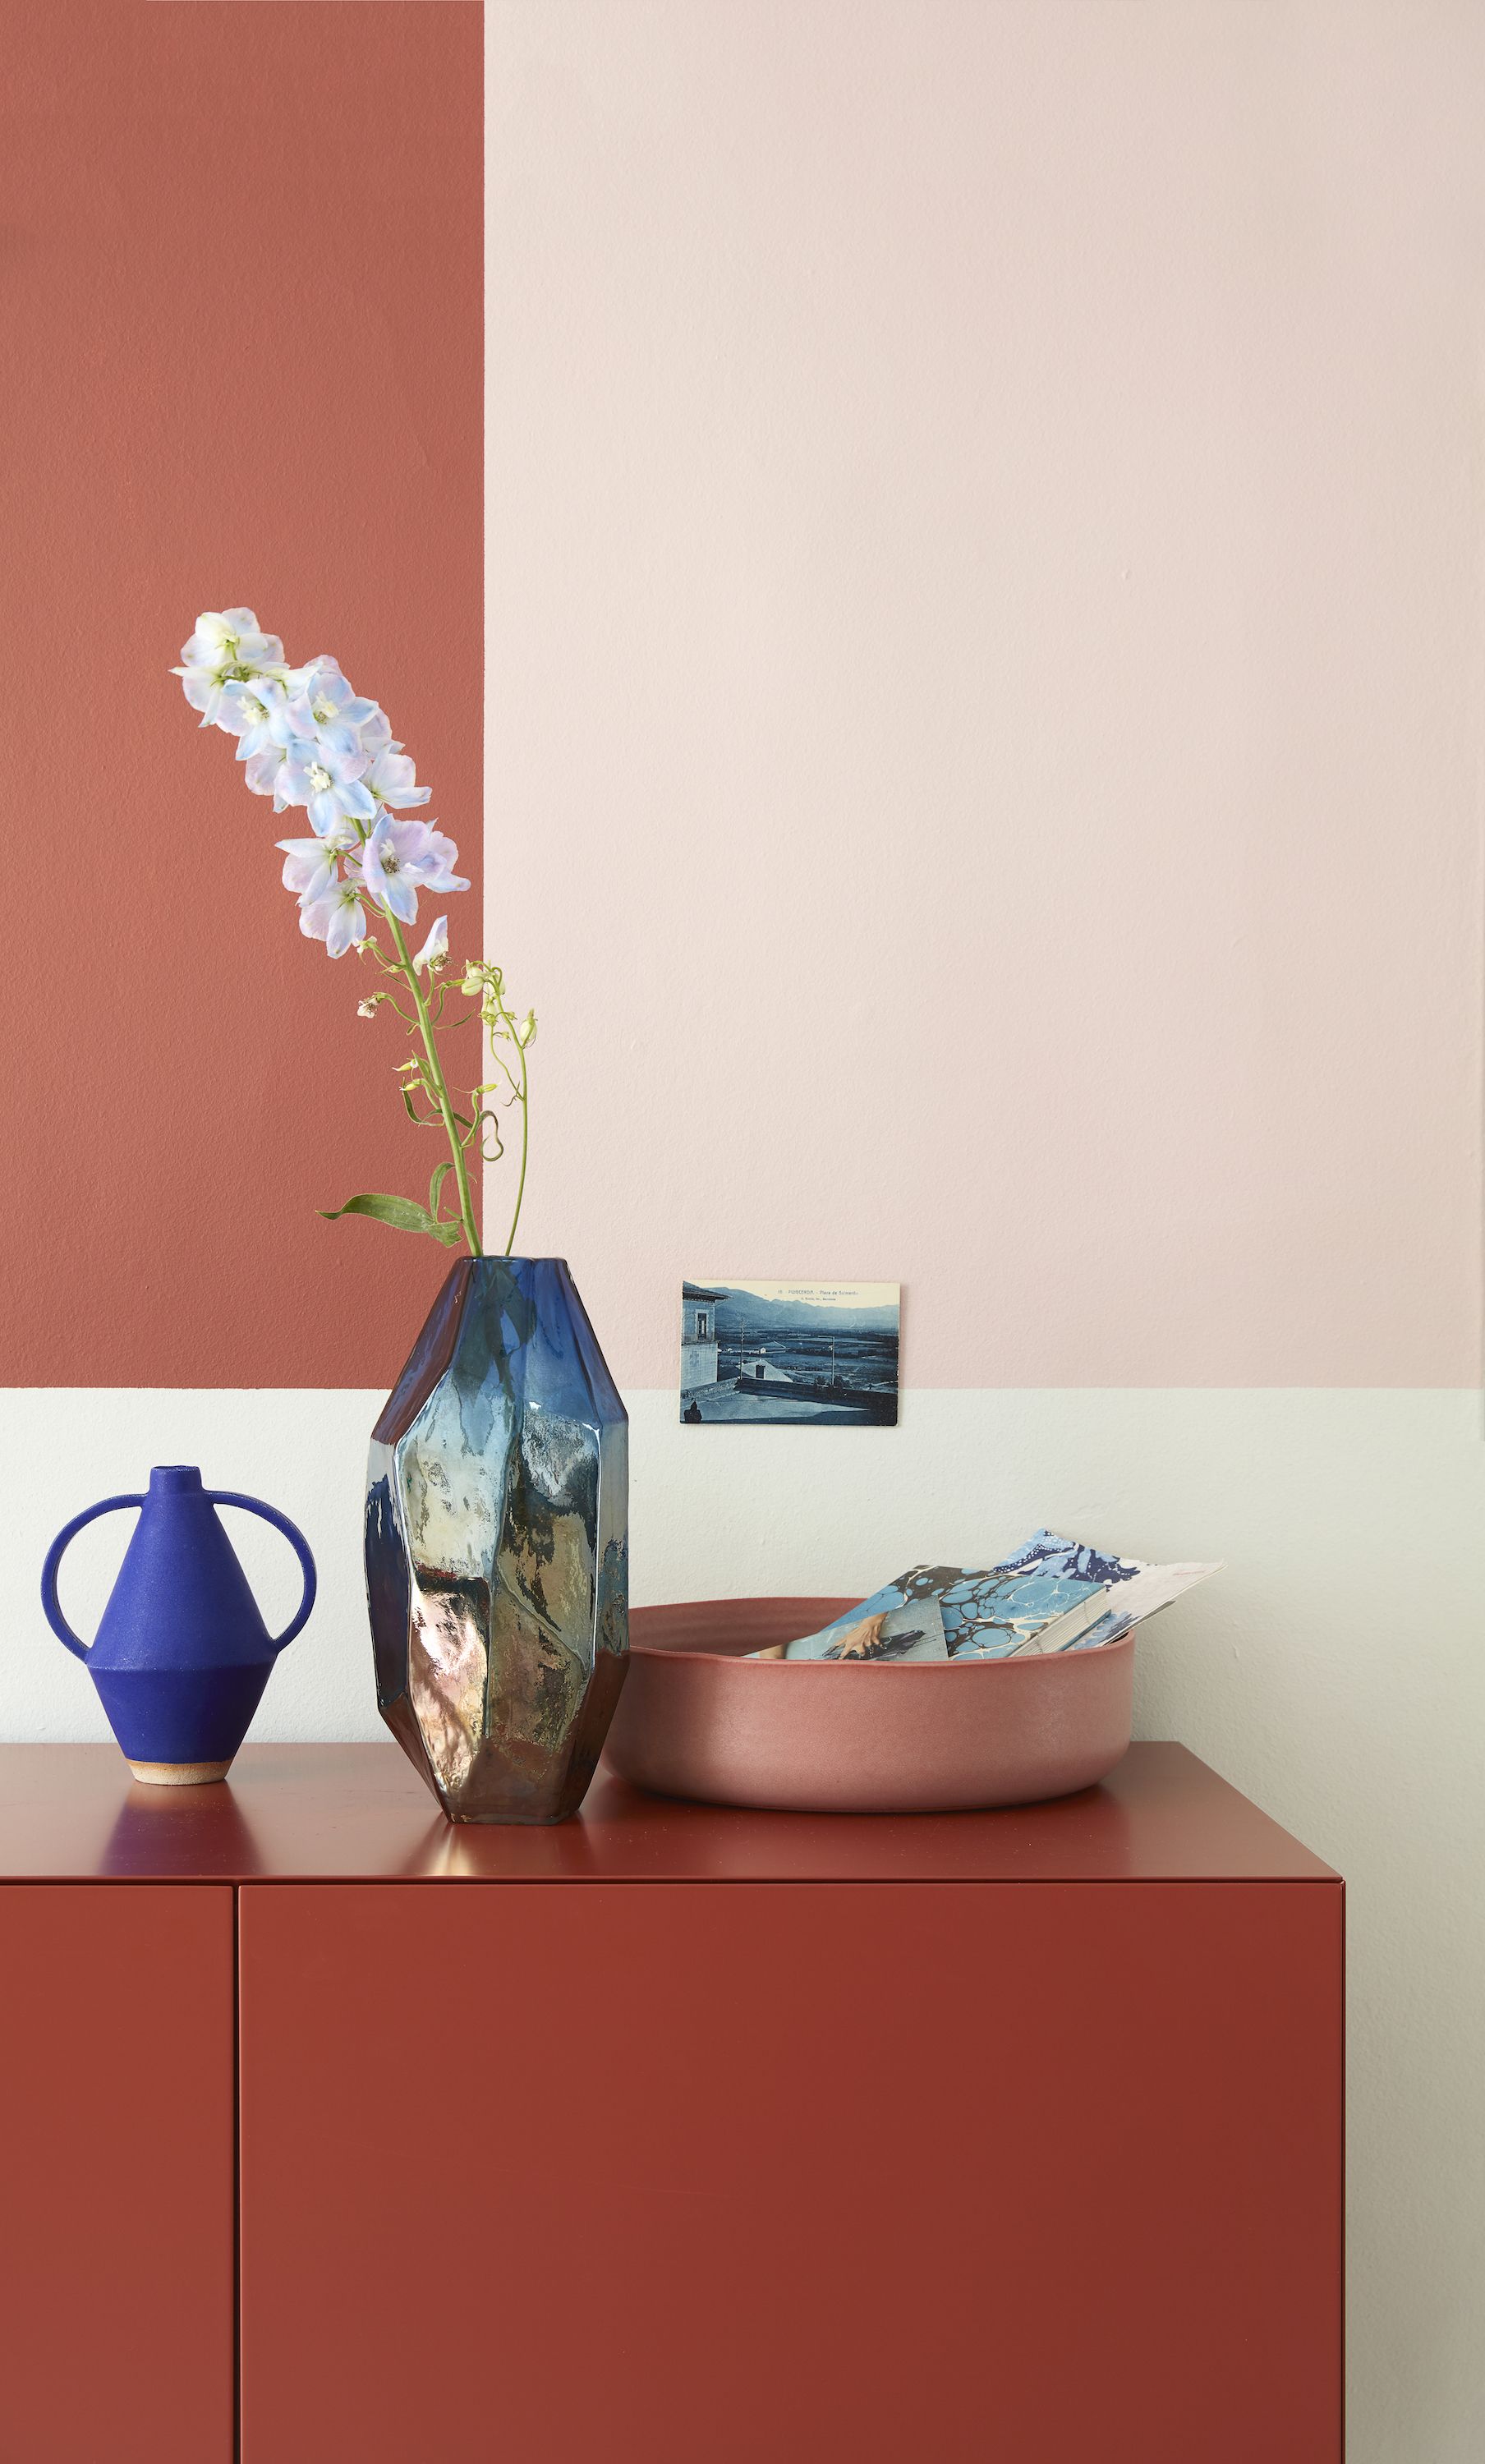 Dusk Blue and Terracotta: The New Interior Design 'It' Pairing